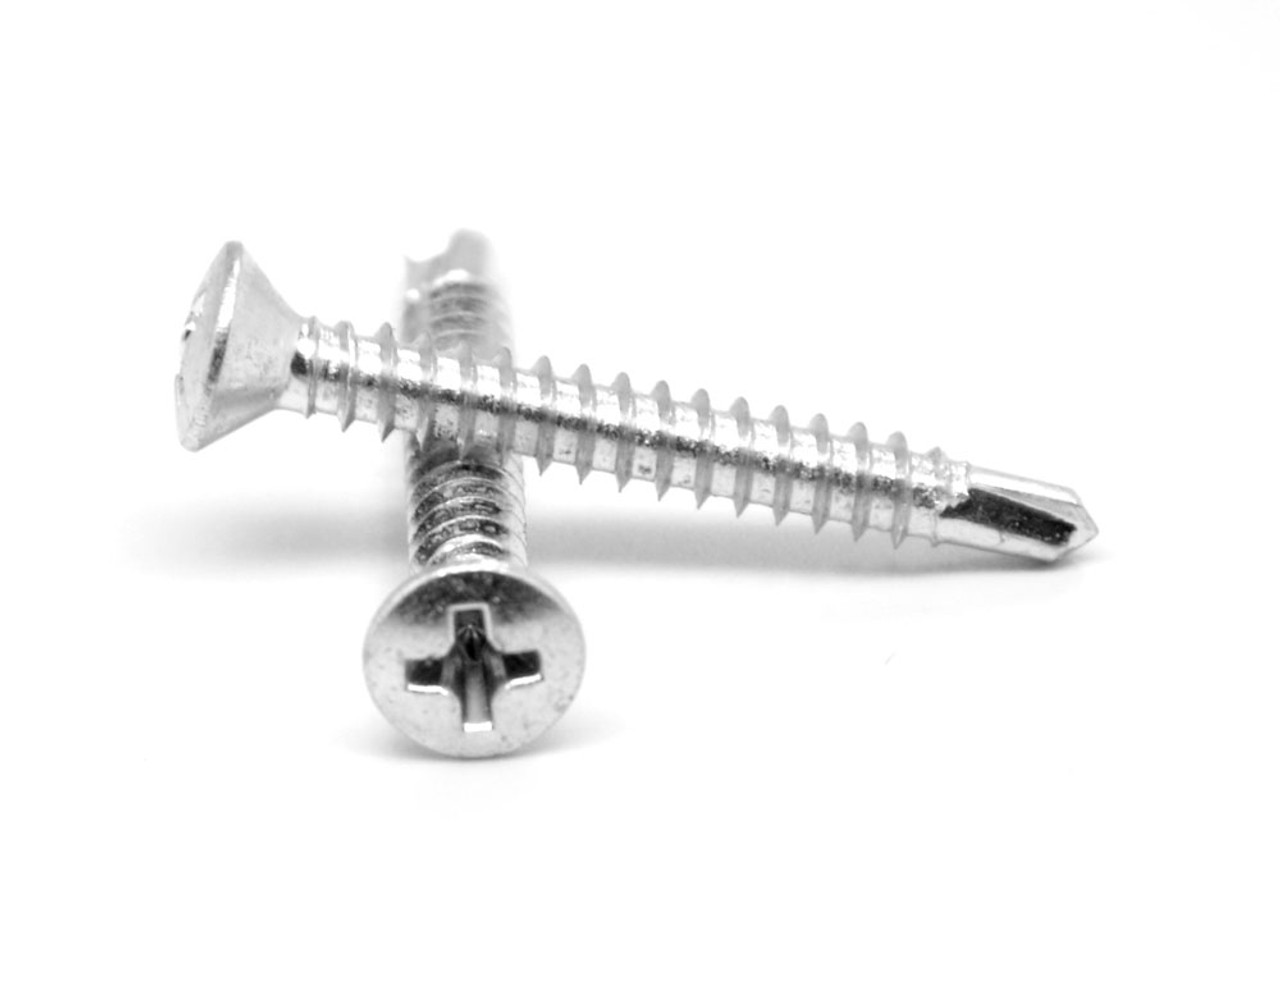 #12-14 x 2" (FT) Self Drilling Screw Phillips Oval Head #3 Point Low Carbon Steel Zinc Plated